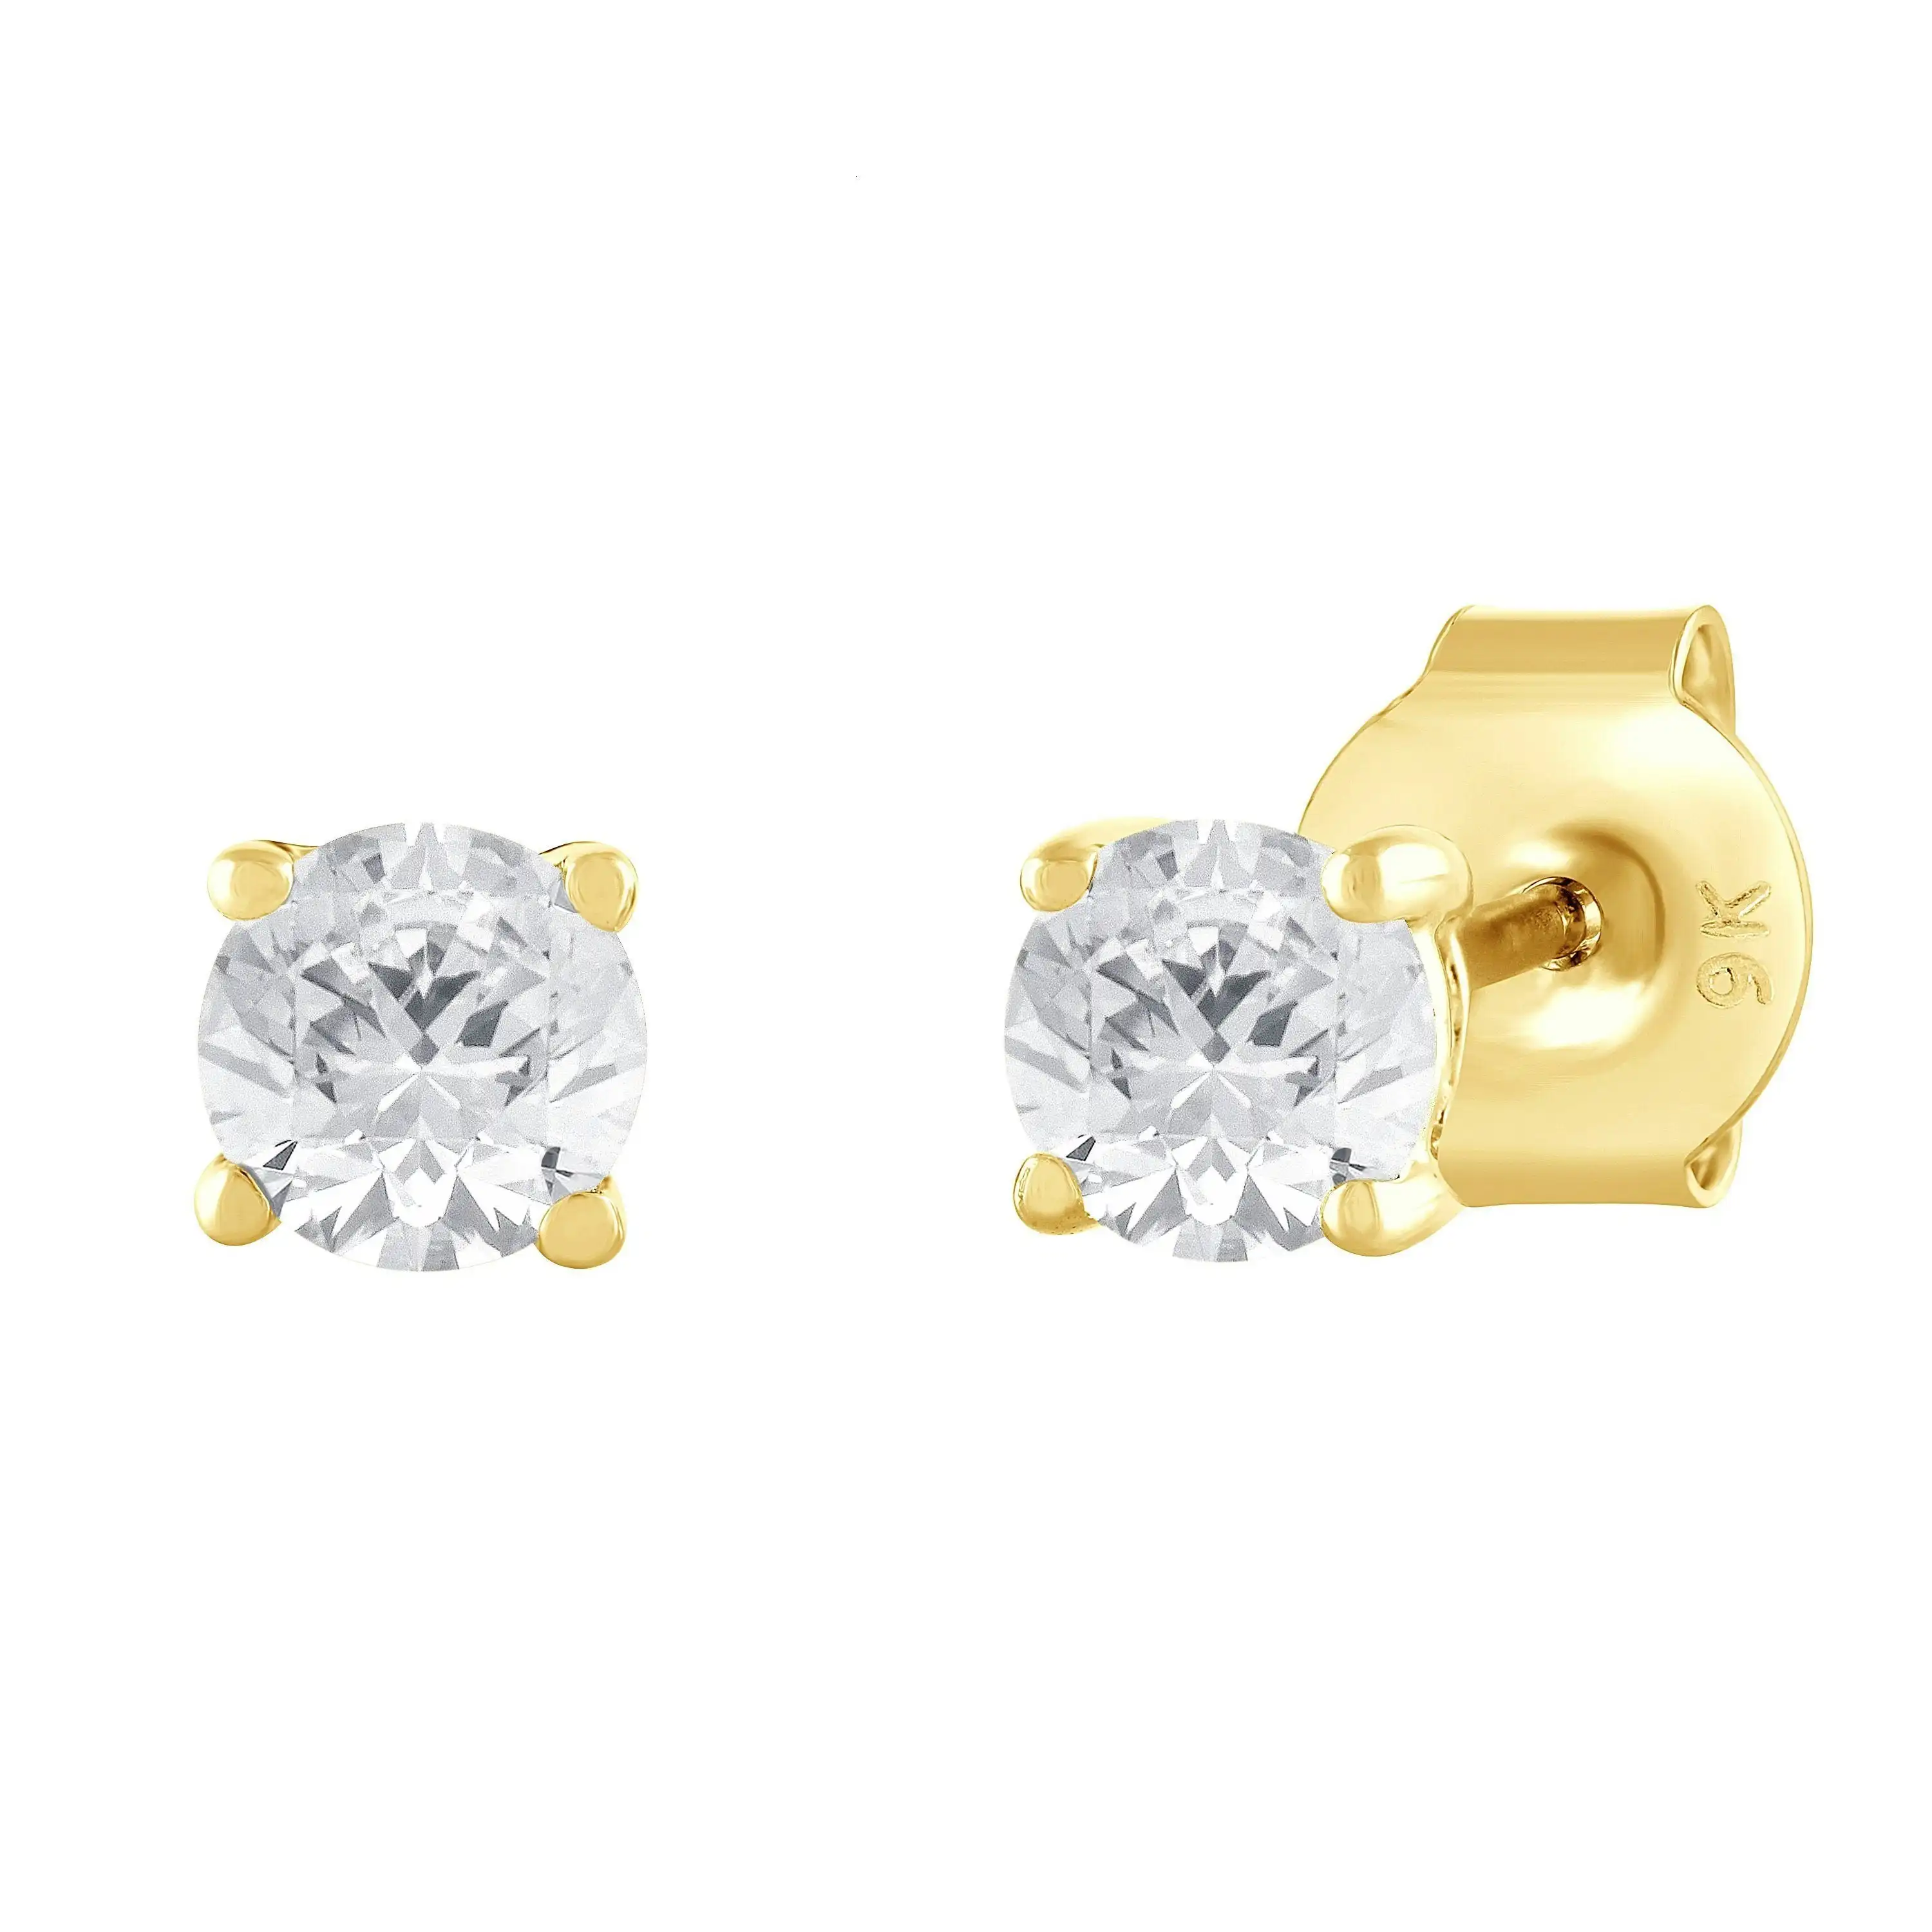 Meera Stud Earrings with 1/2ct of Laboratory Grown Diamonds in 9ct Yellow Gold